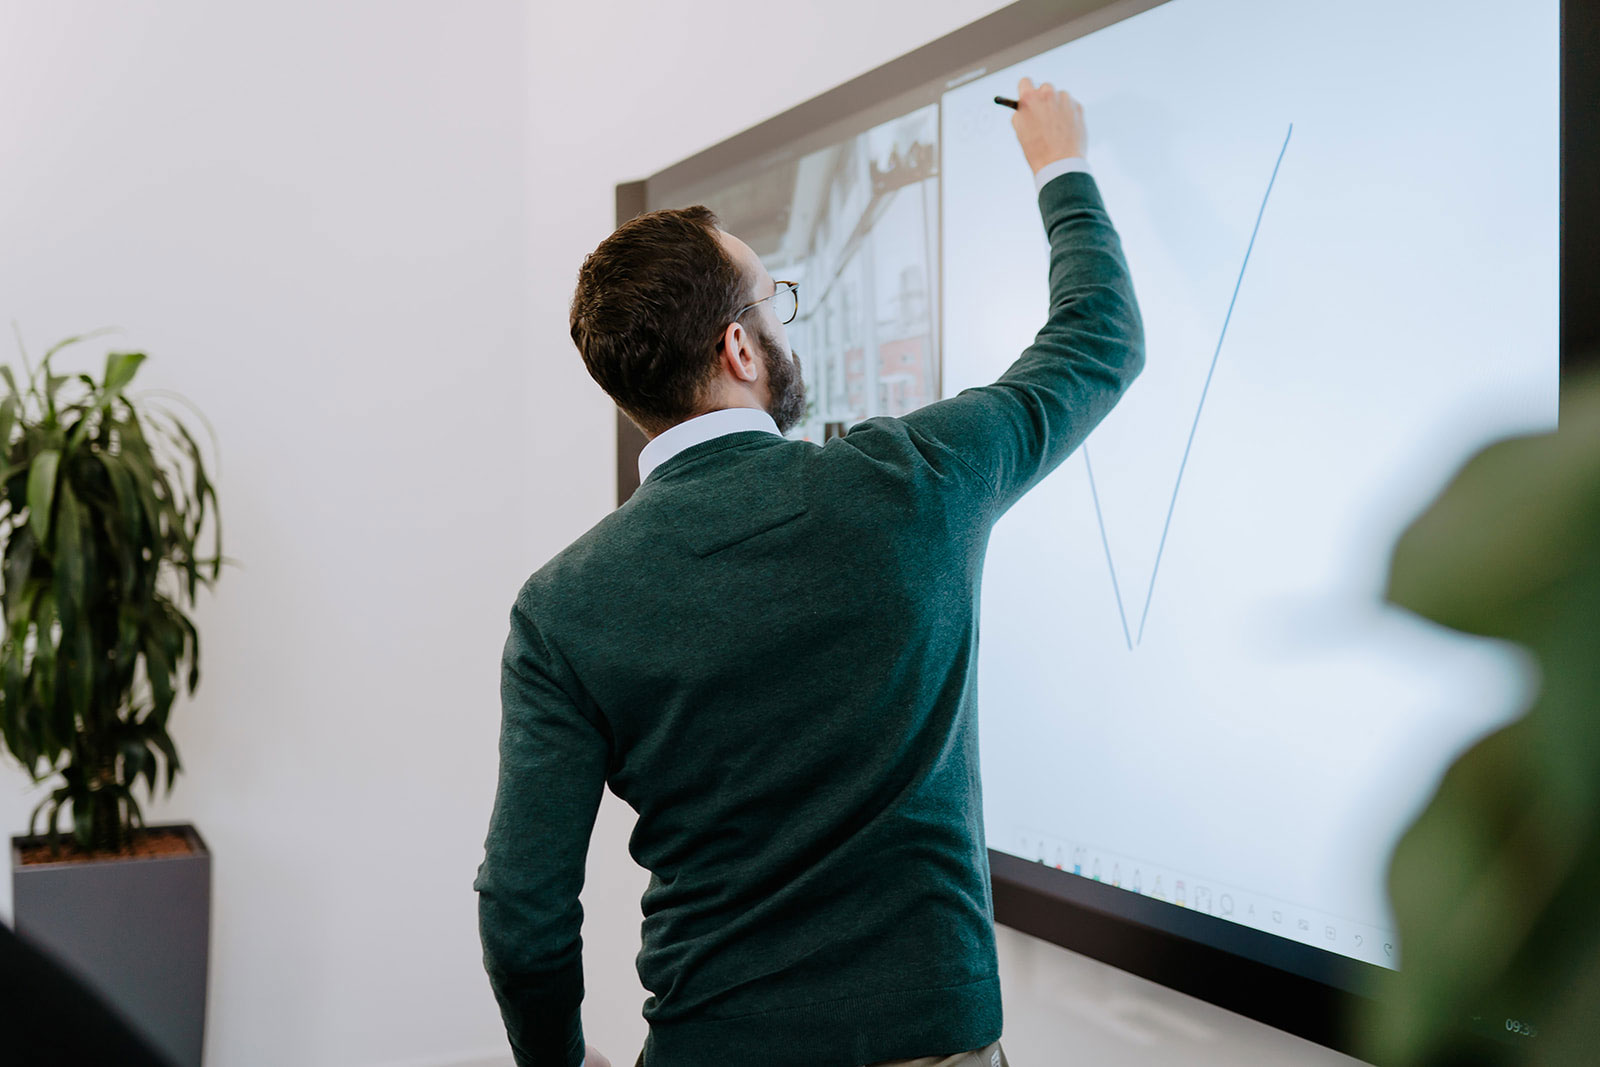 An employee works at a smartboard